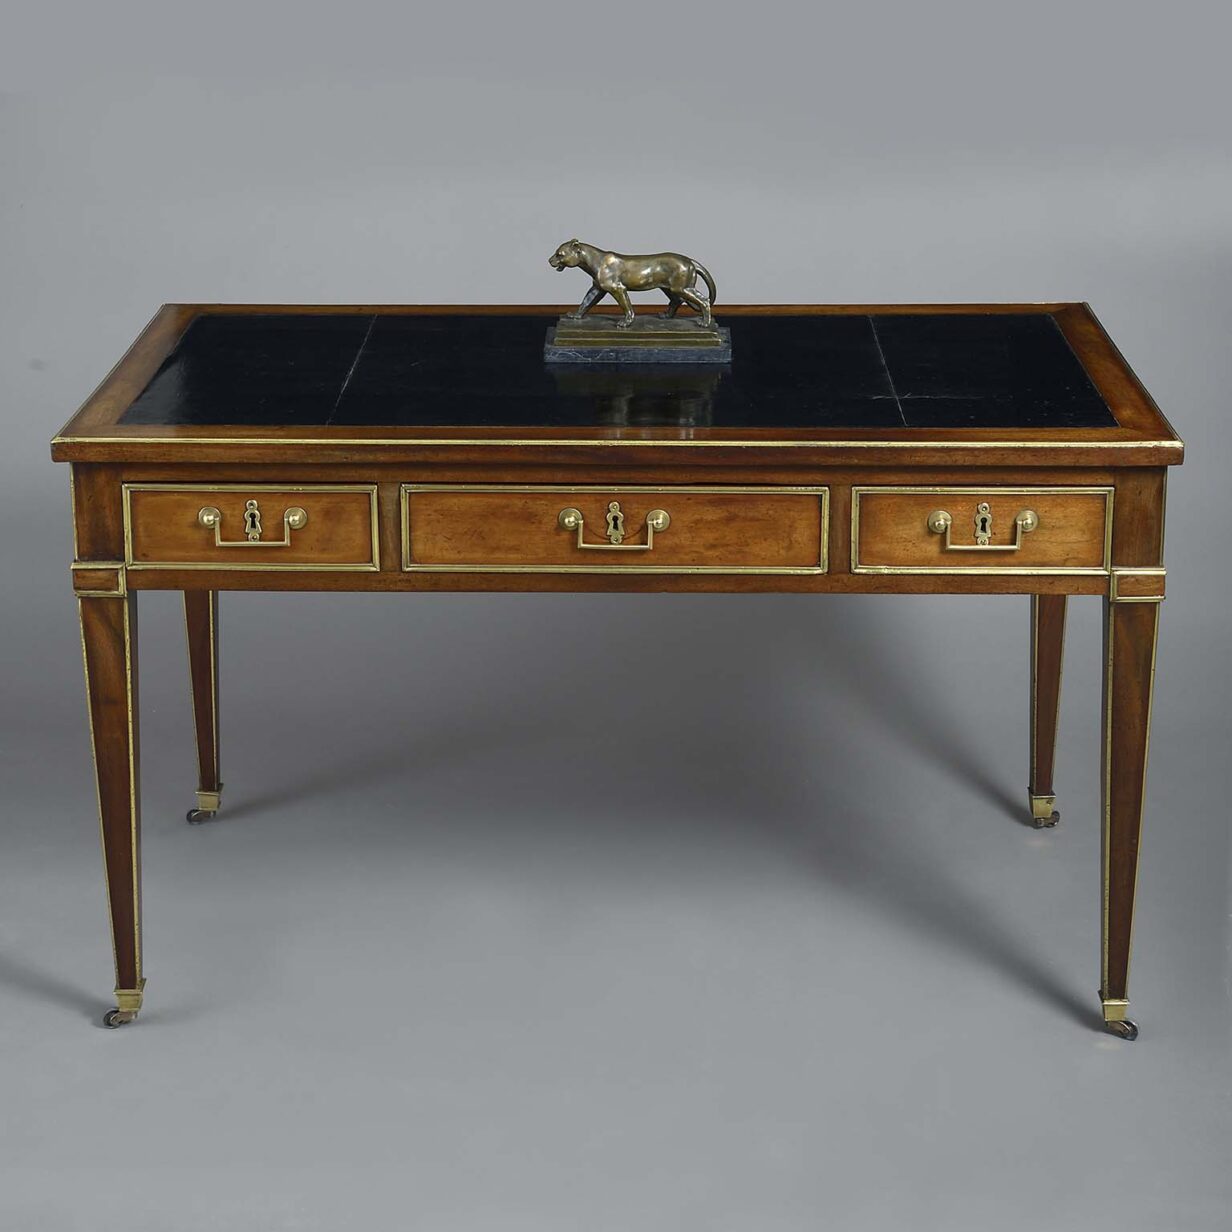 Louis xvi period mahogany and brass mounted writing table